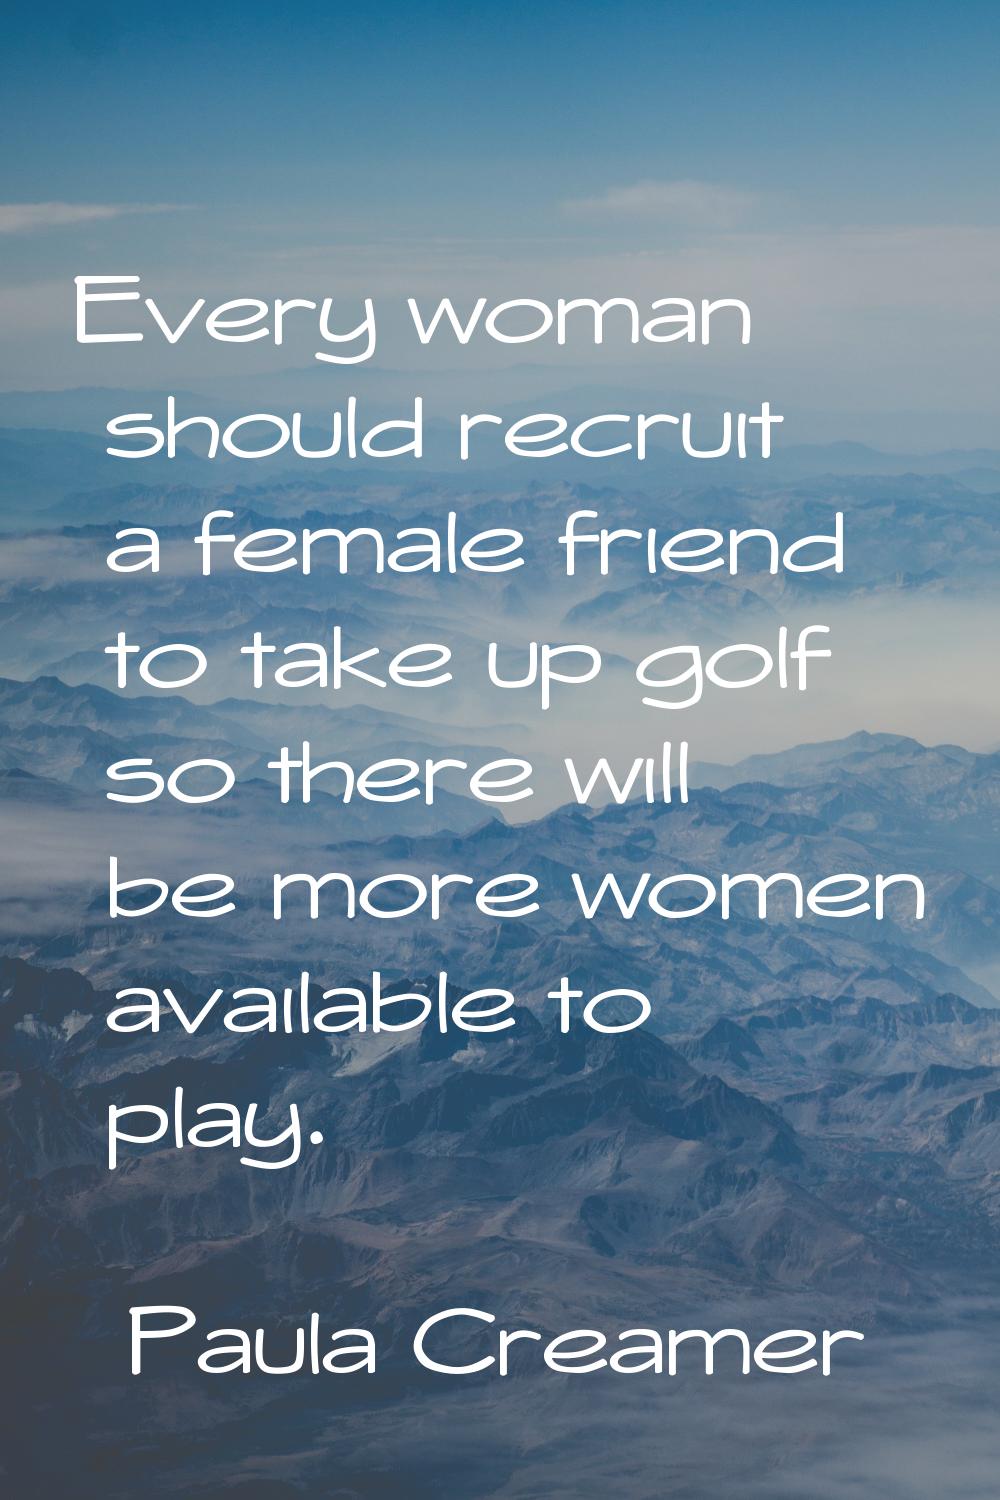 Every woman should recruit a female friend to take up golf so there will be more women available to